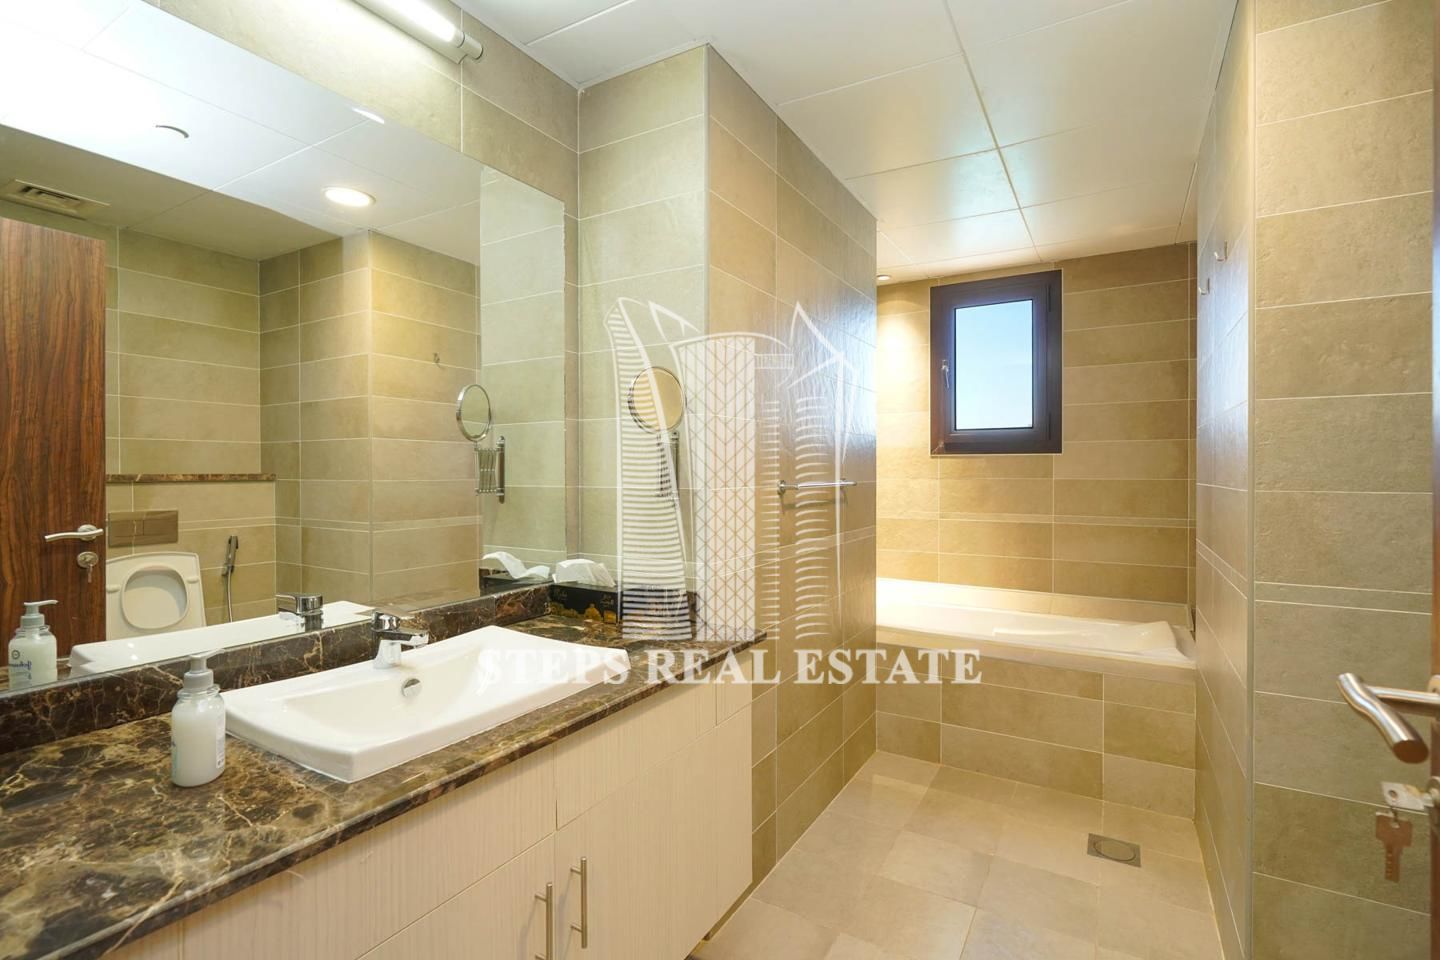 Stunning 2 Bedroom Furnished Apartment